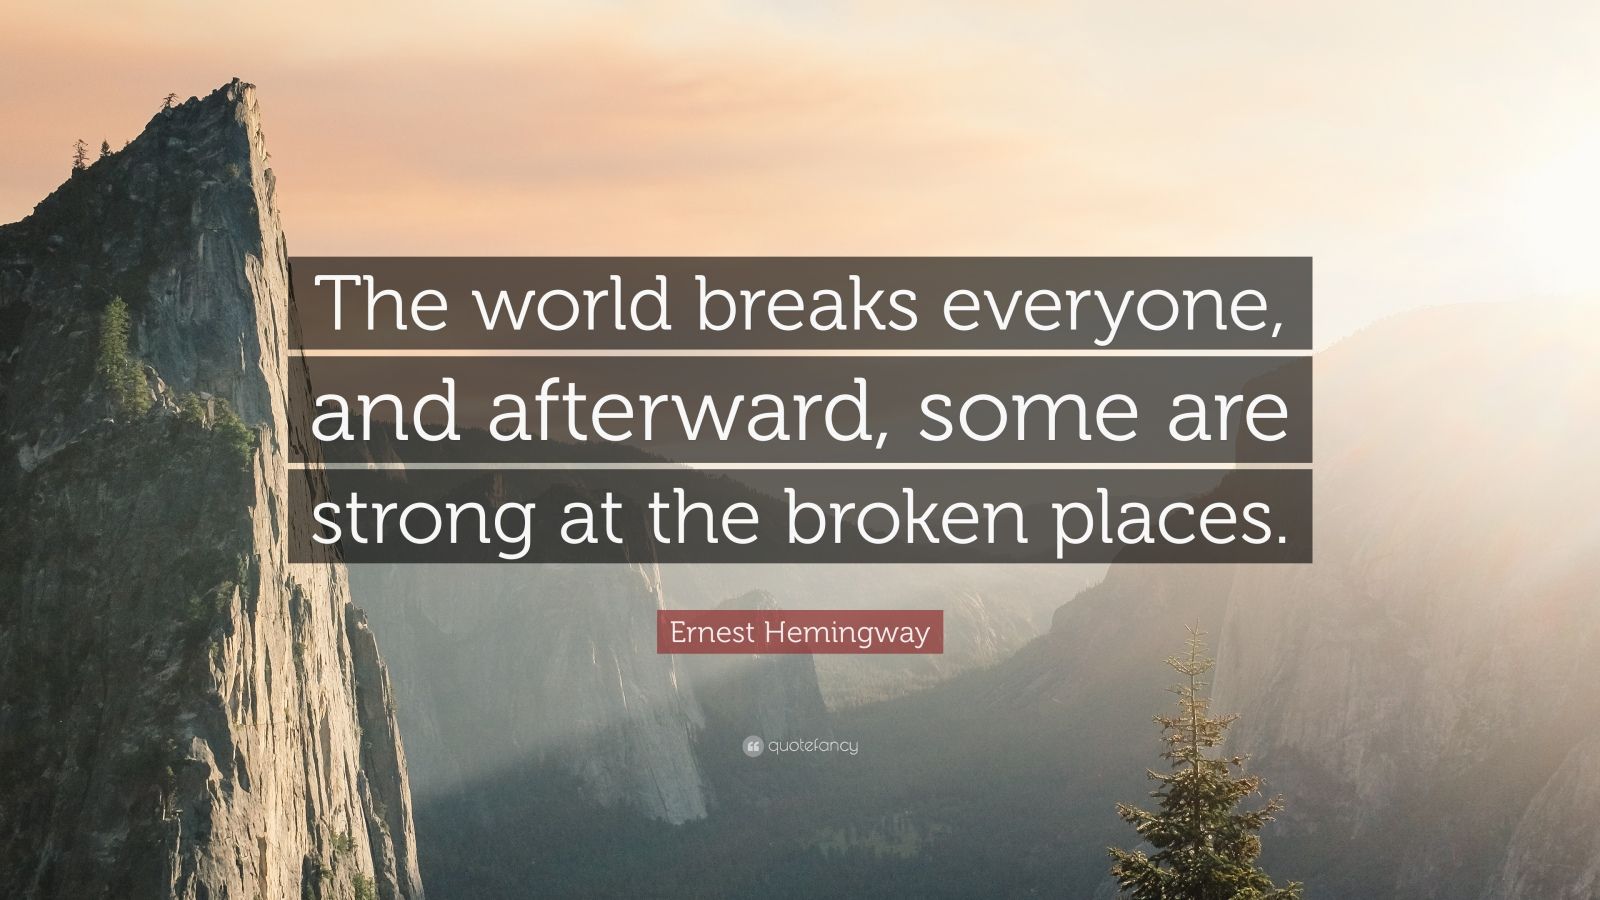 Ernest Hemingway Quote: “The world breaks everyone, and afterward, some